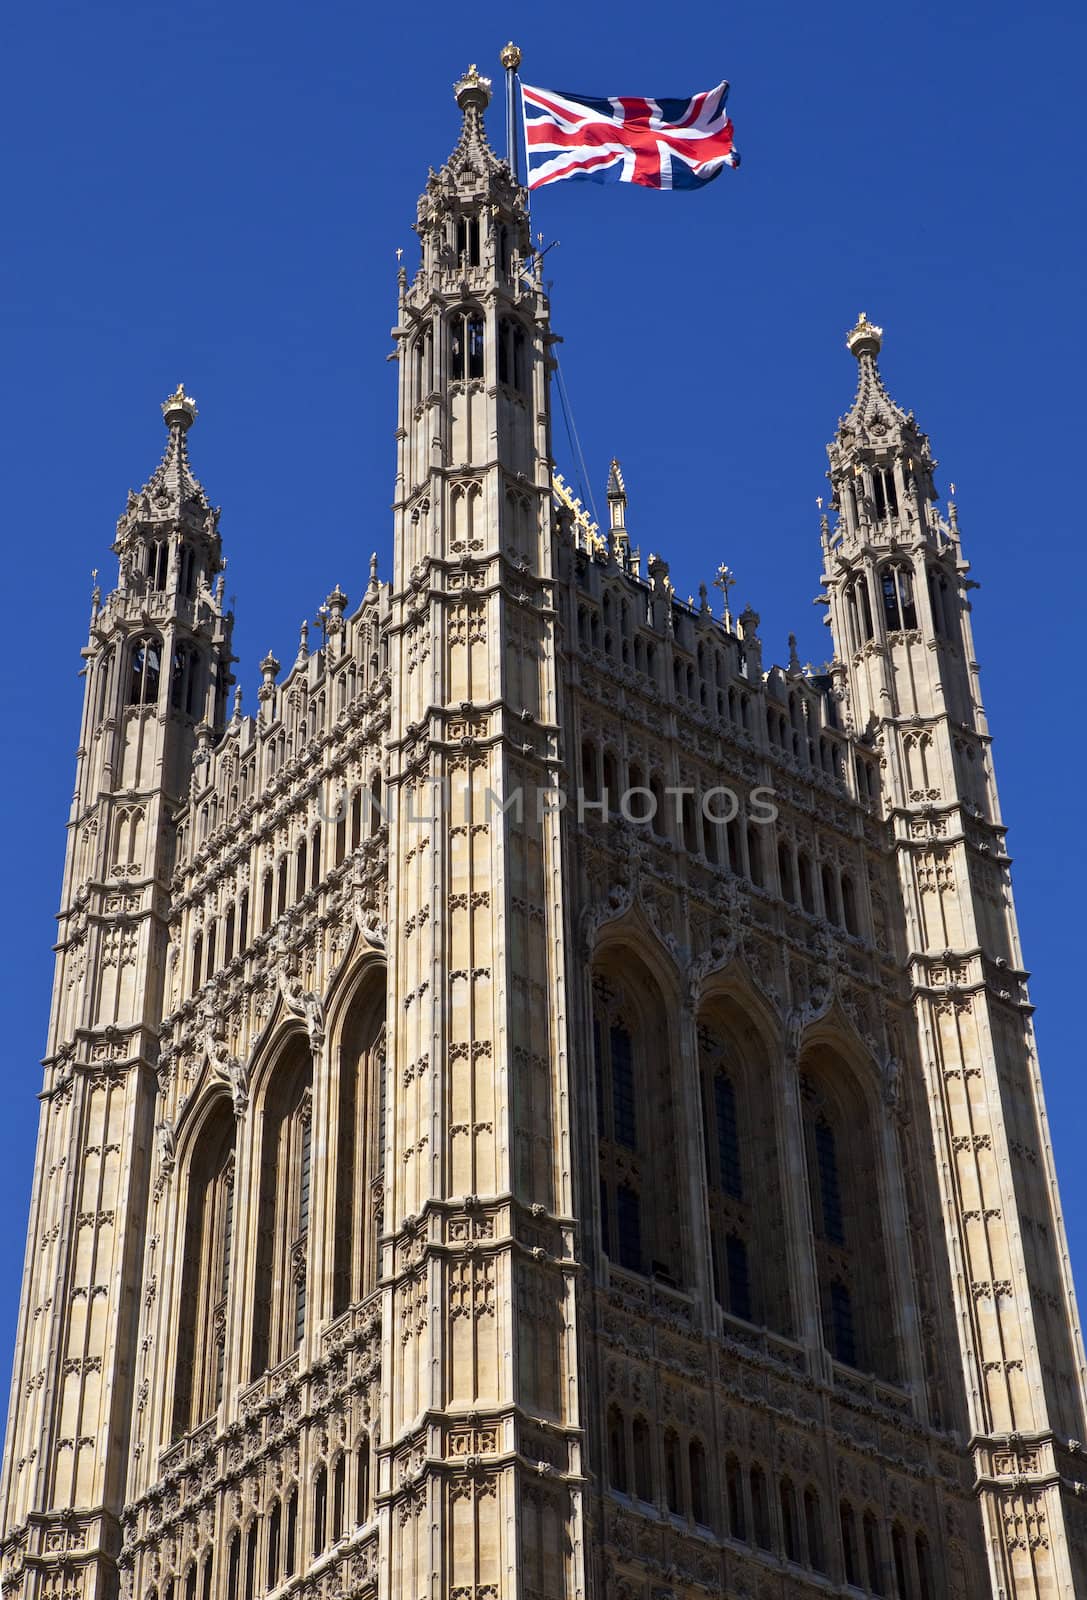 The Victoria Tower of the Houses of Parliament/Palace of Westminster in London.